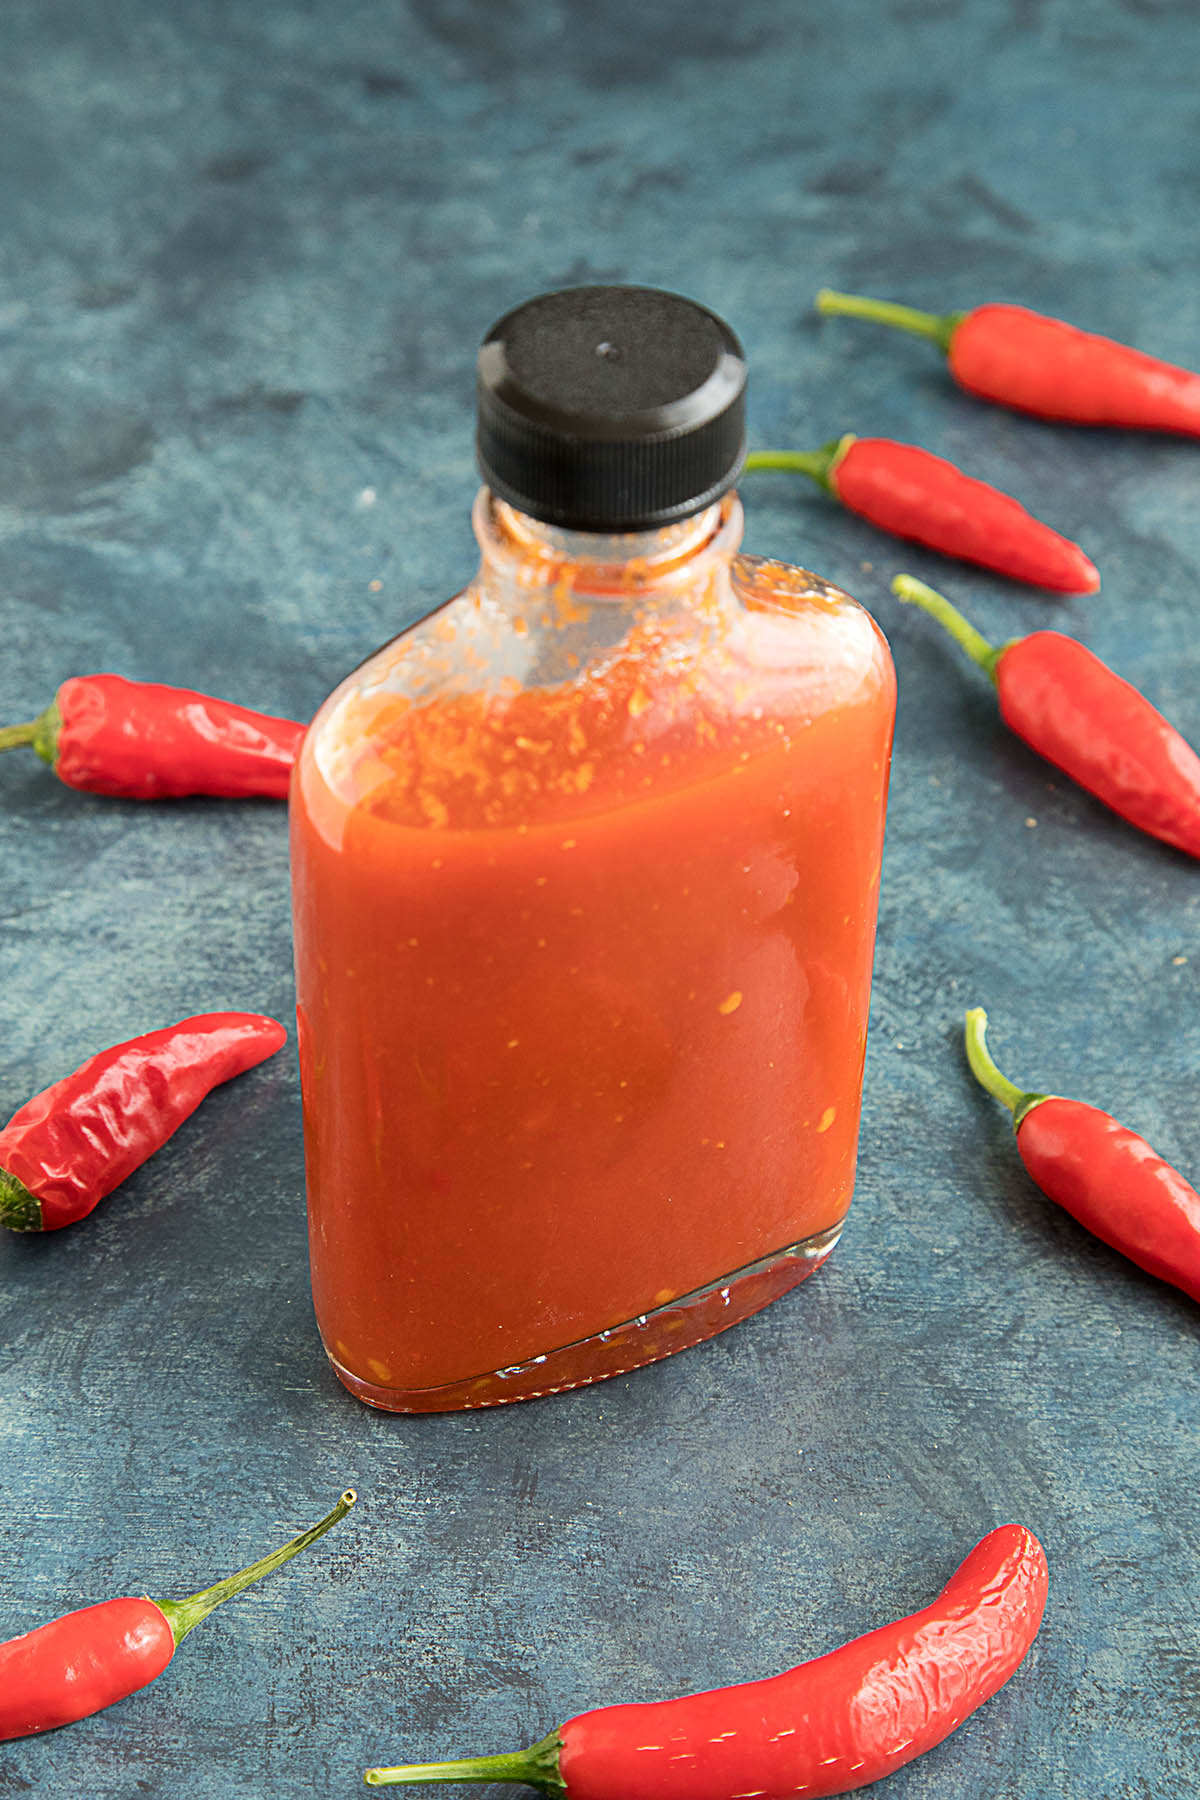 Homemade Louisiana Hot Sauce with plenty of peppers around the bottle